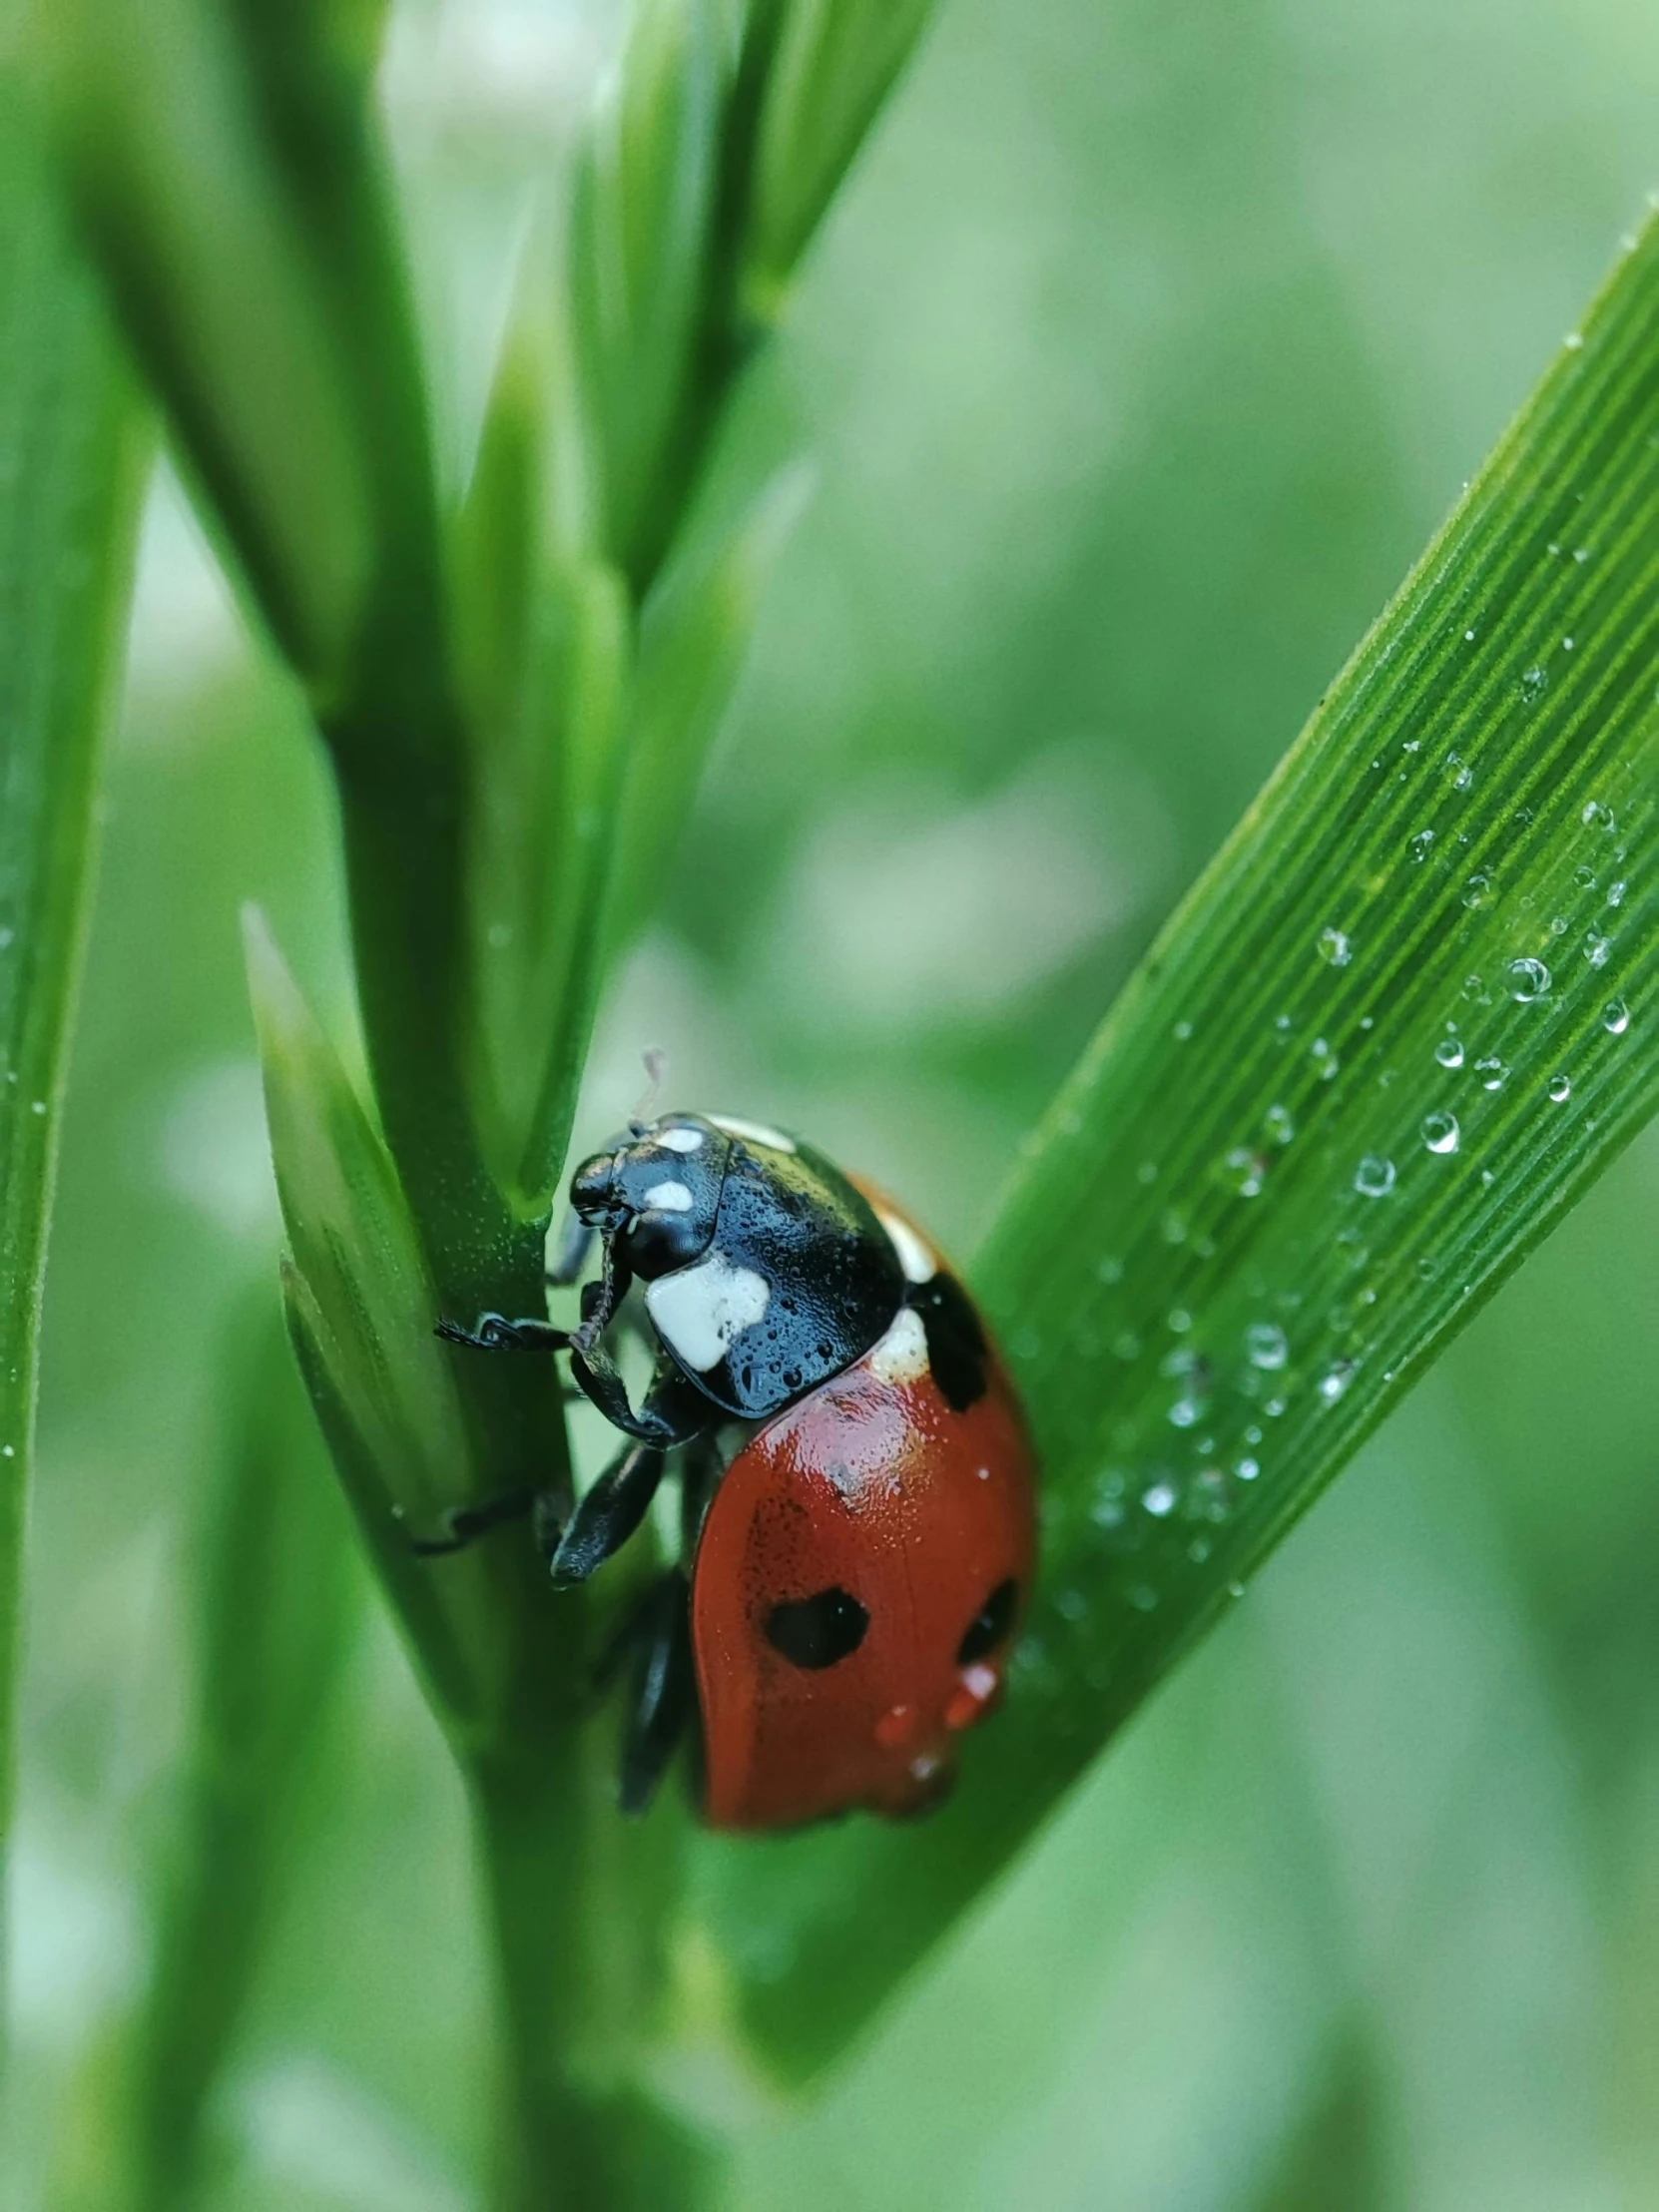 a small ladybug sits on the leaf of the plant